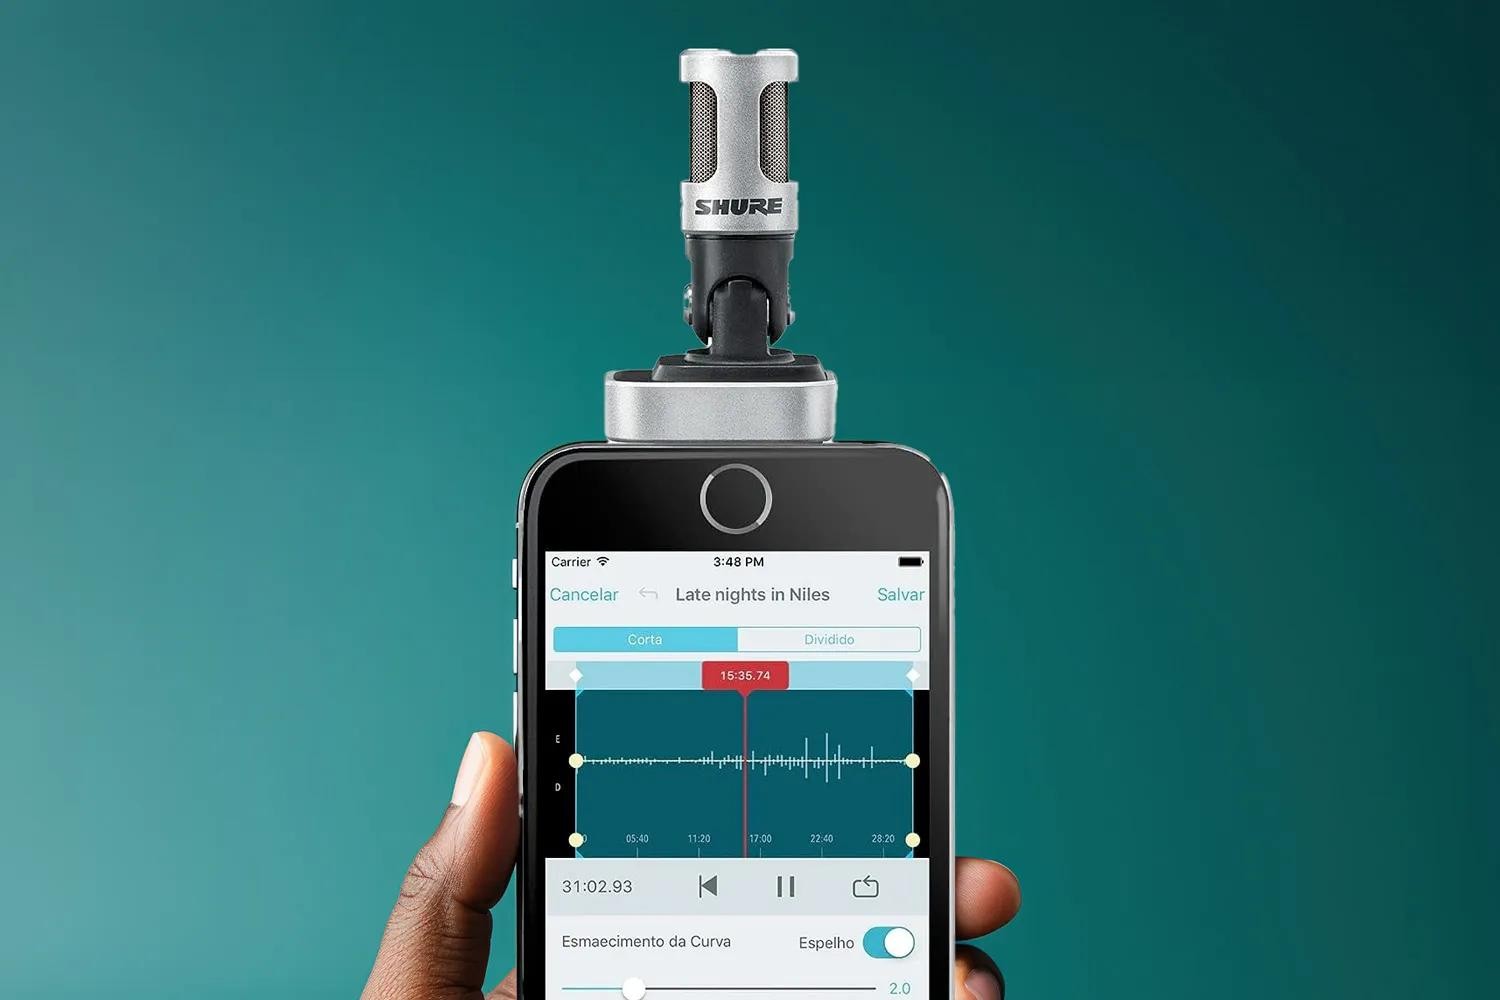 How To Use A Condenser Microphone On IPhone